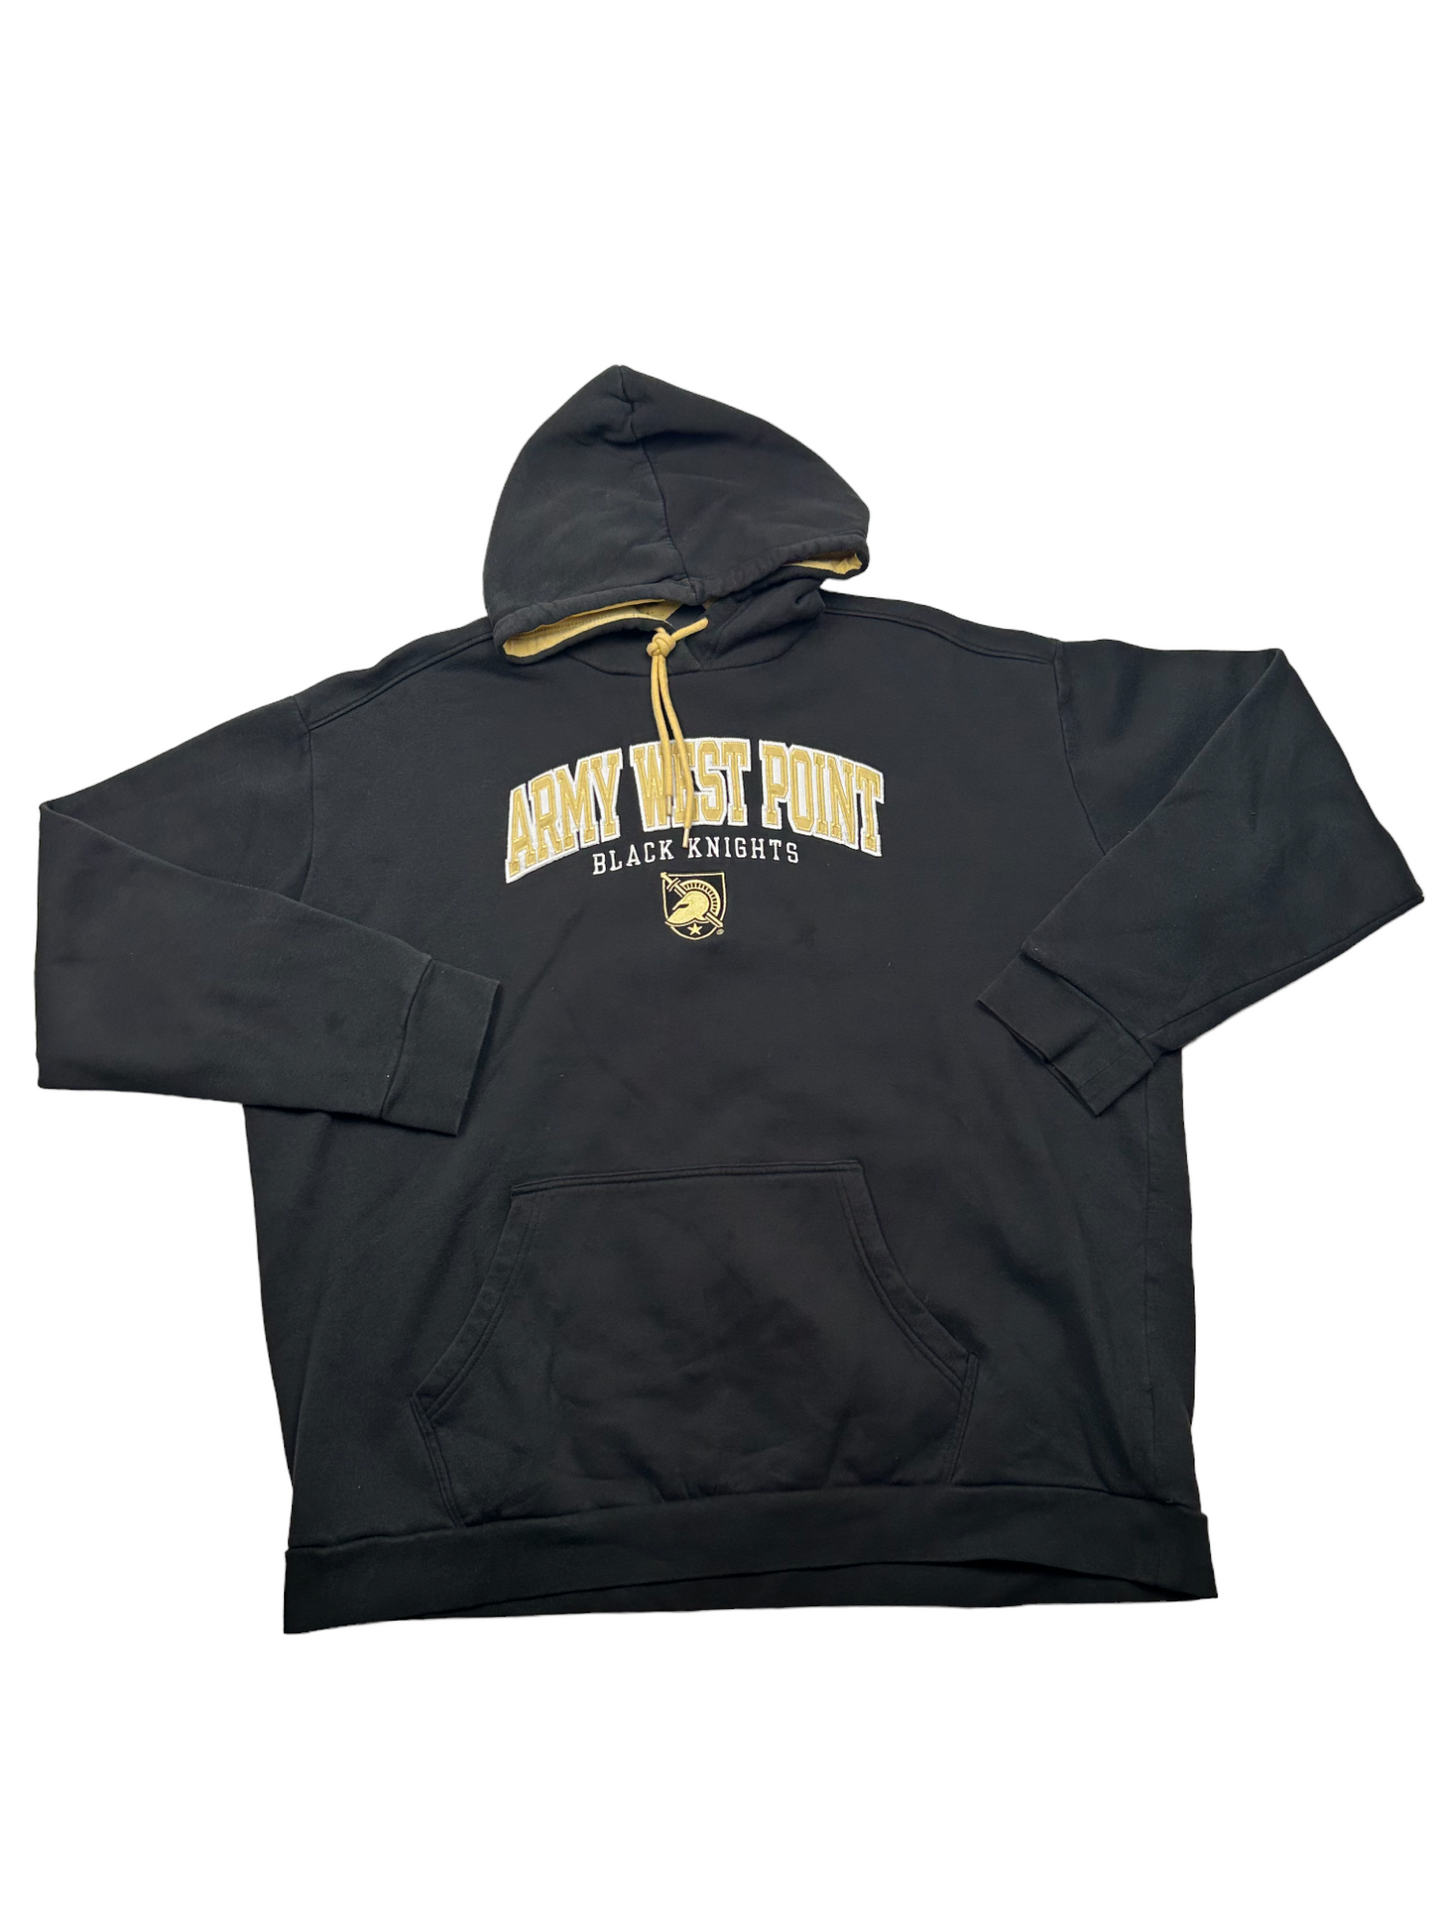 Army West Point Hoodie